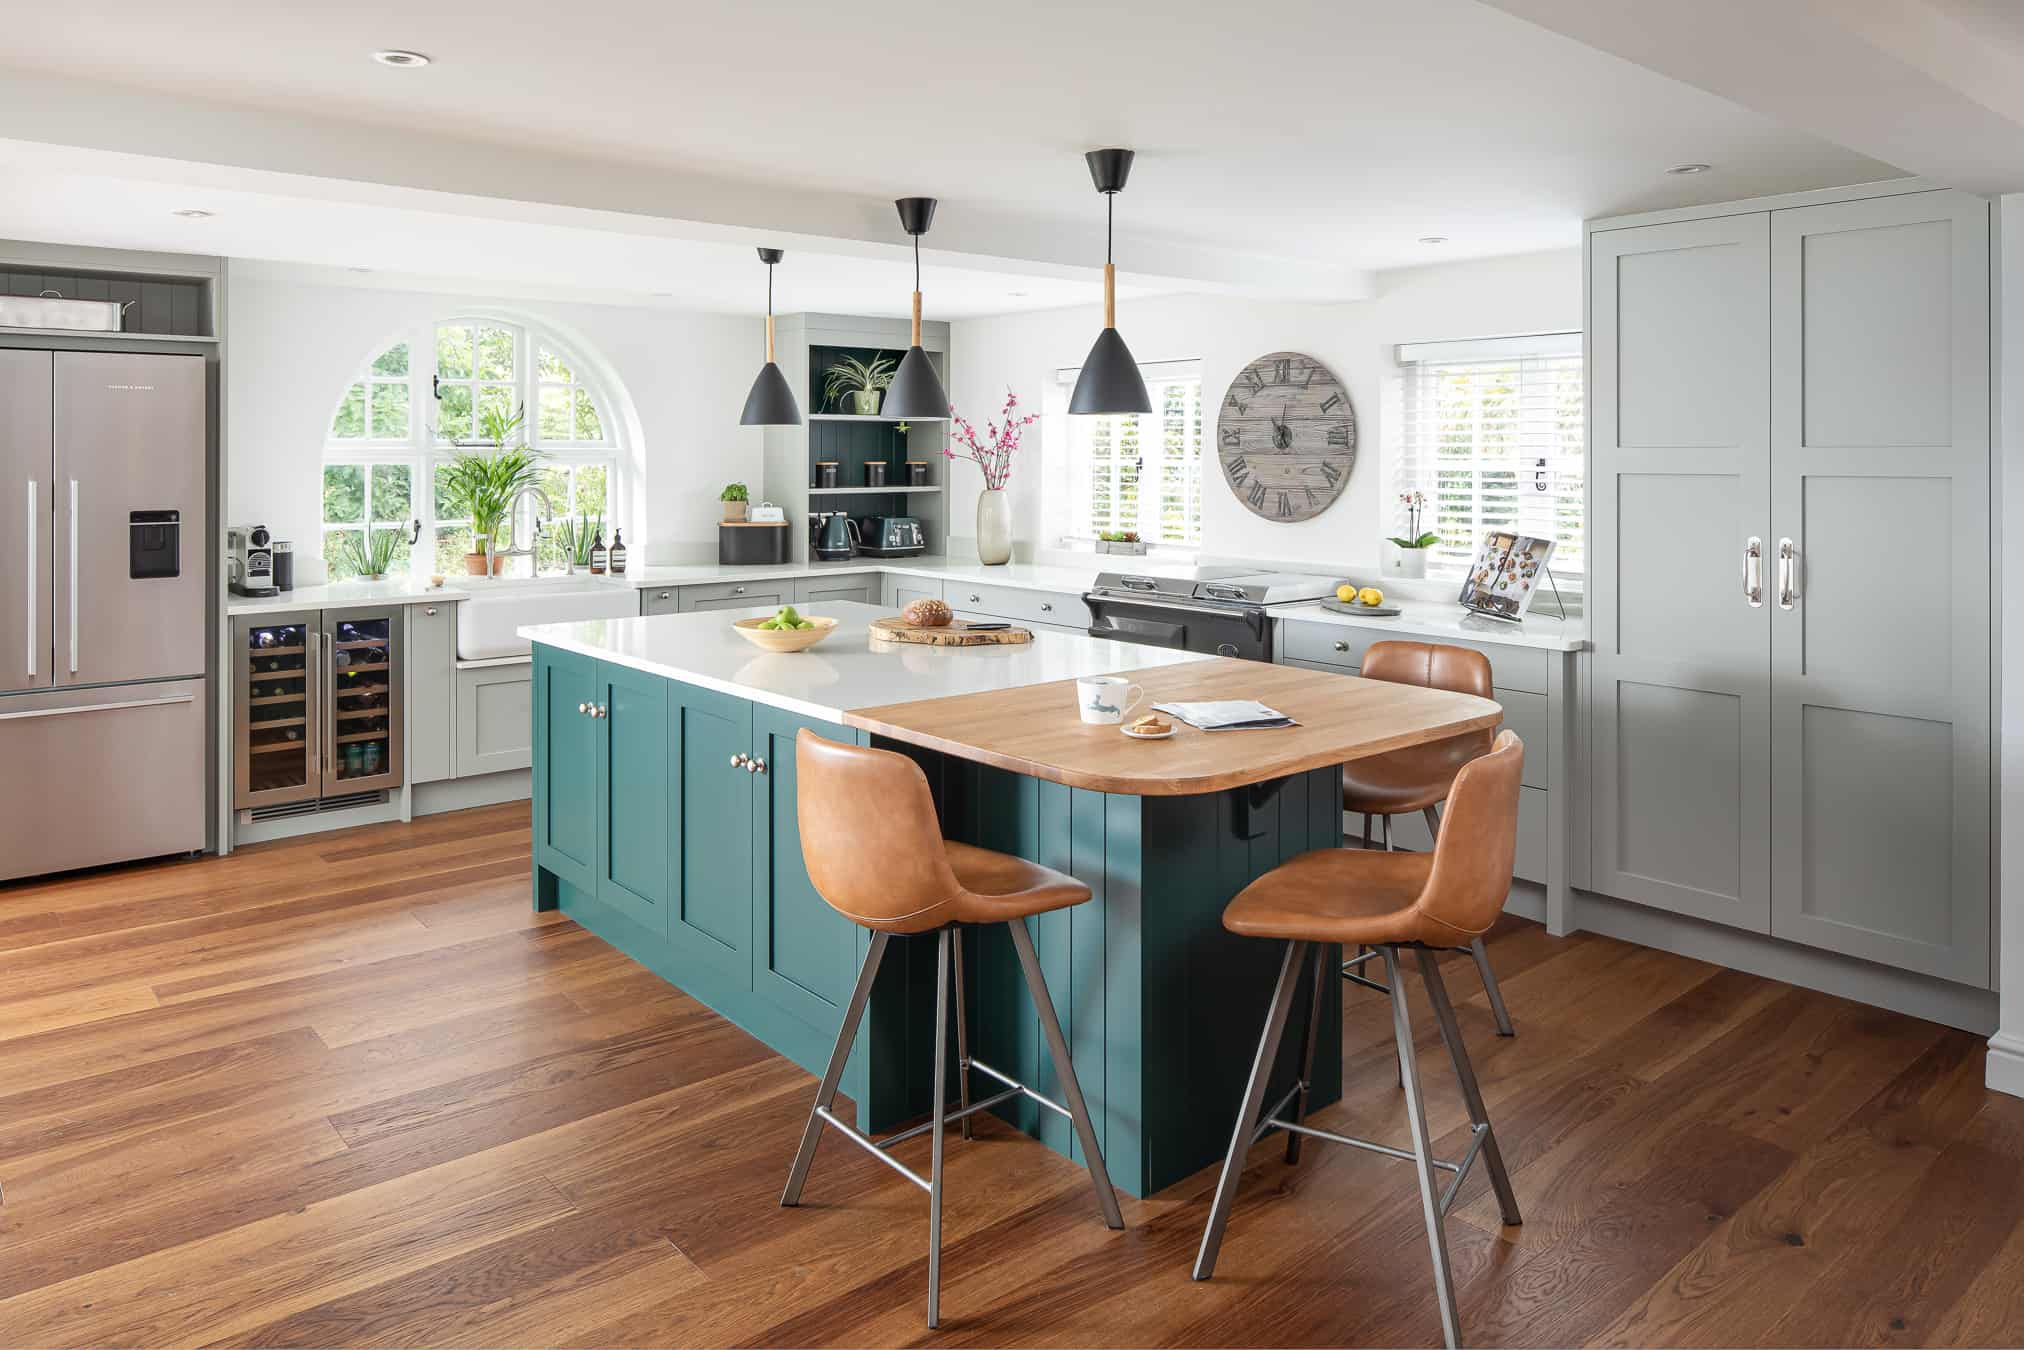 John Lewis of Hungerford luxury shaker style cottage kitchen with wooden flooring and grey cabinetry with a green kitchen island and wooden stools